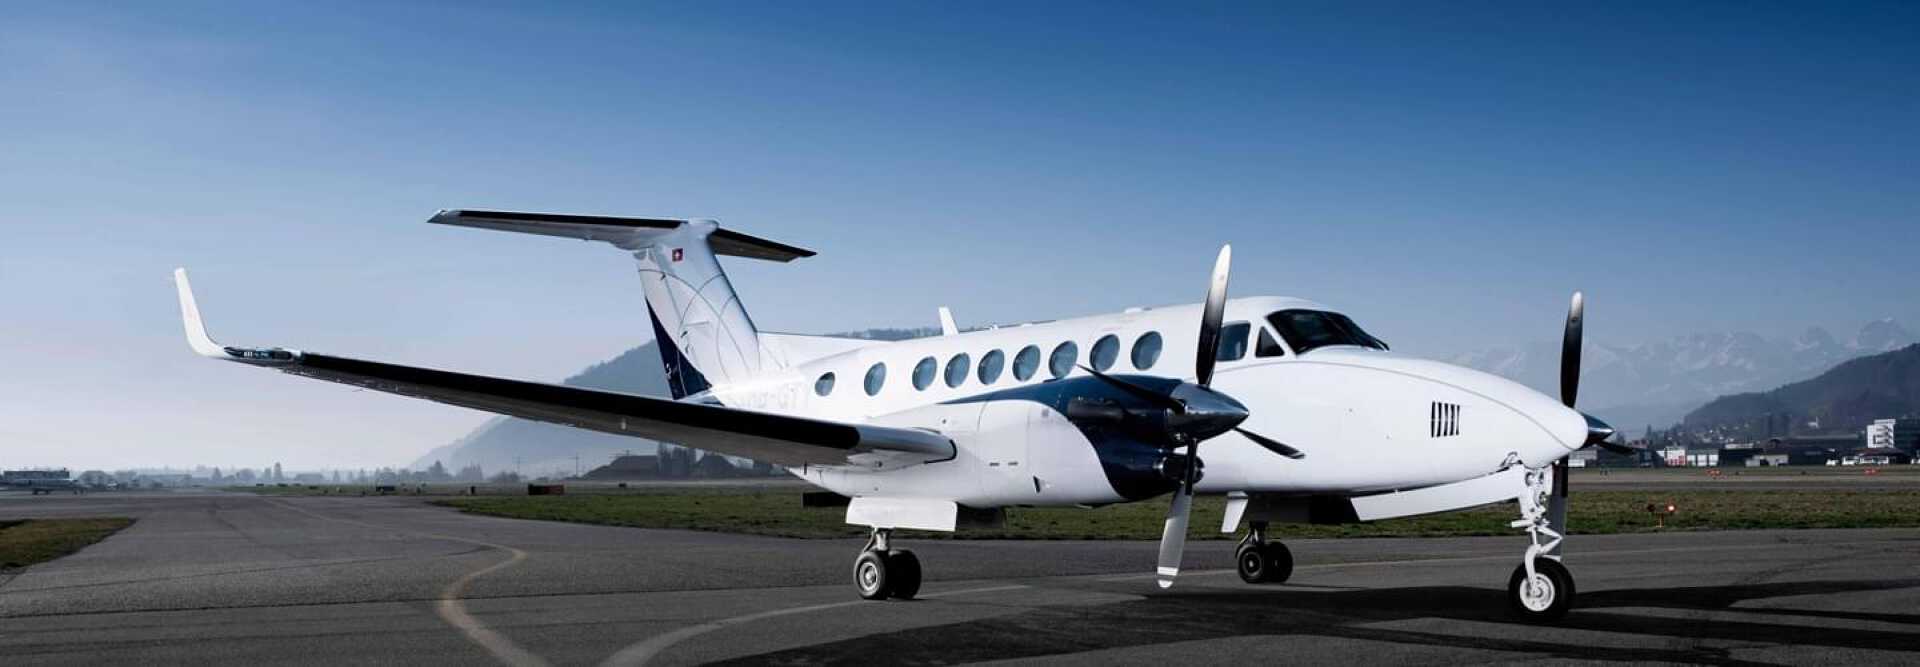 Turboprop Beechcraft King Air 350i to charter with Lunajets perfect for short-haul trips to any airfield at low operating costs